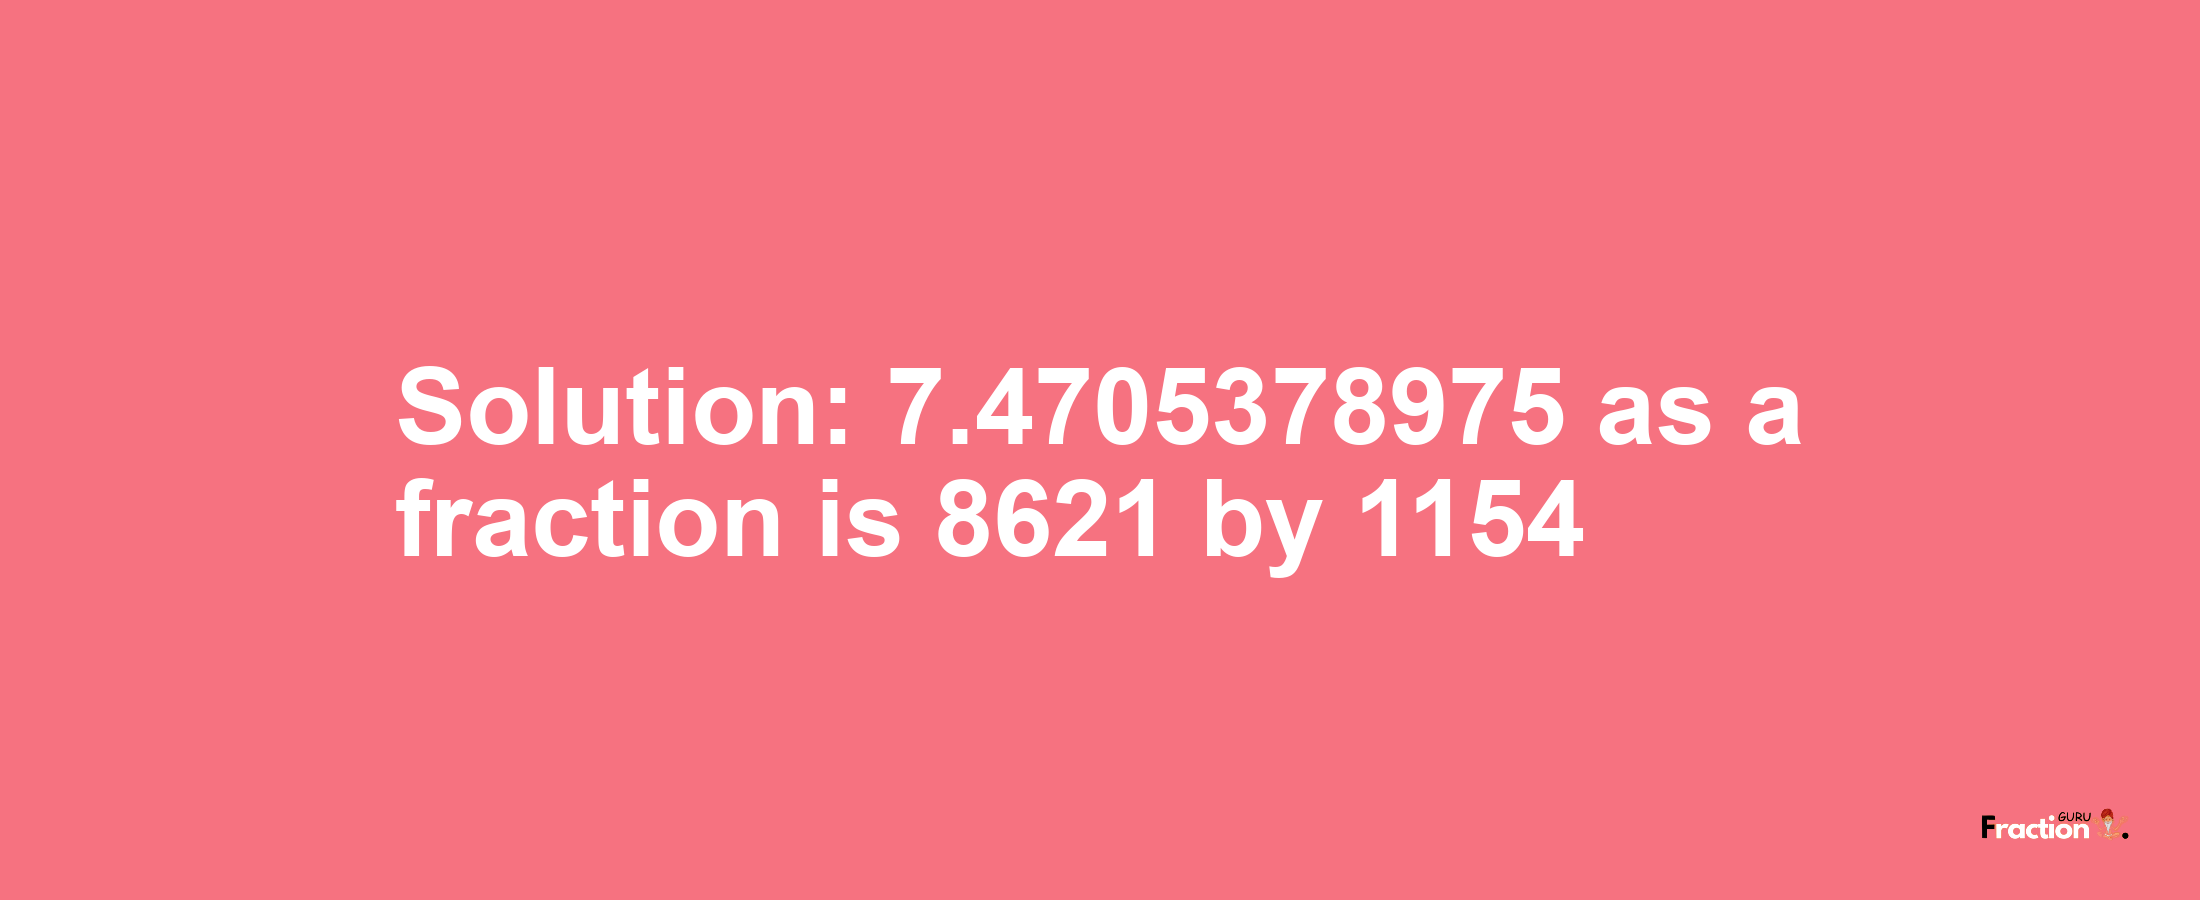 Solution:7.4705378975 as a fraction is 8621/1154